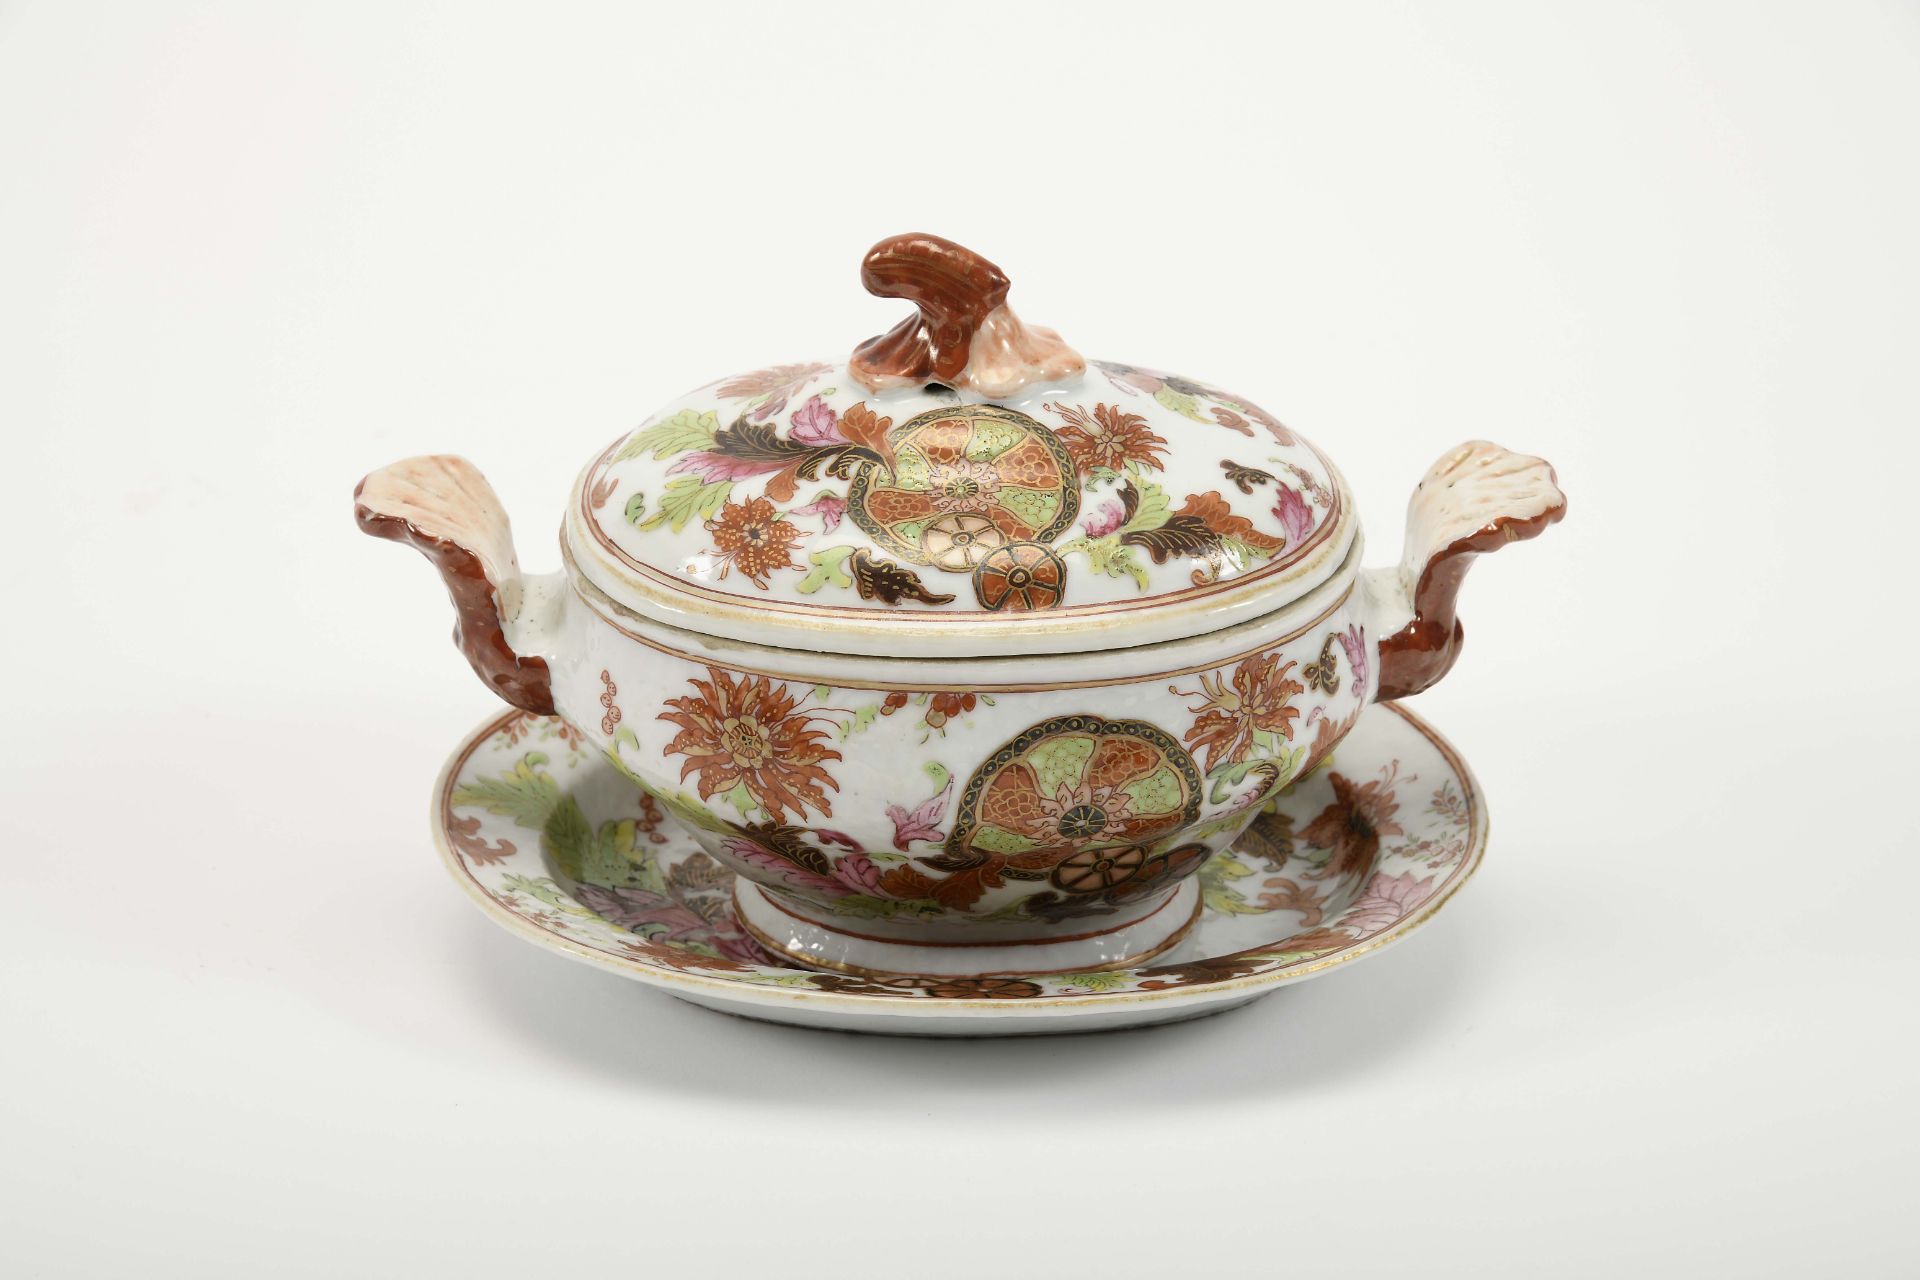 A small tureen with an oval stand